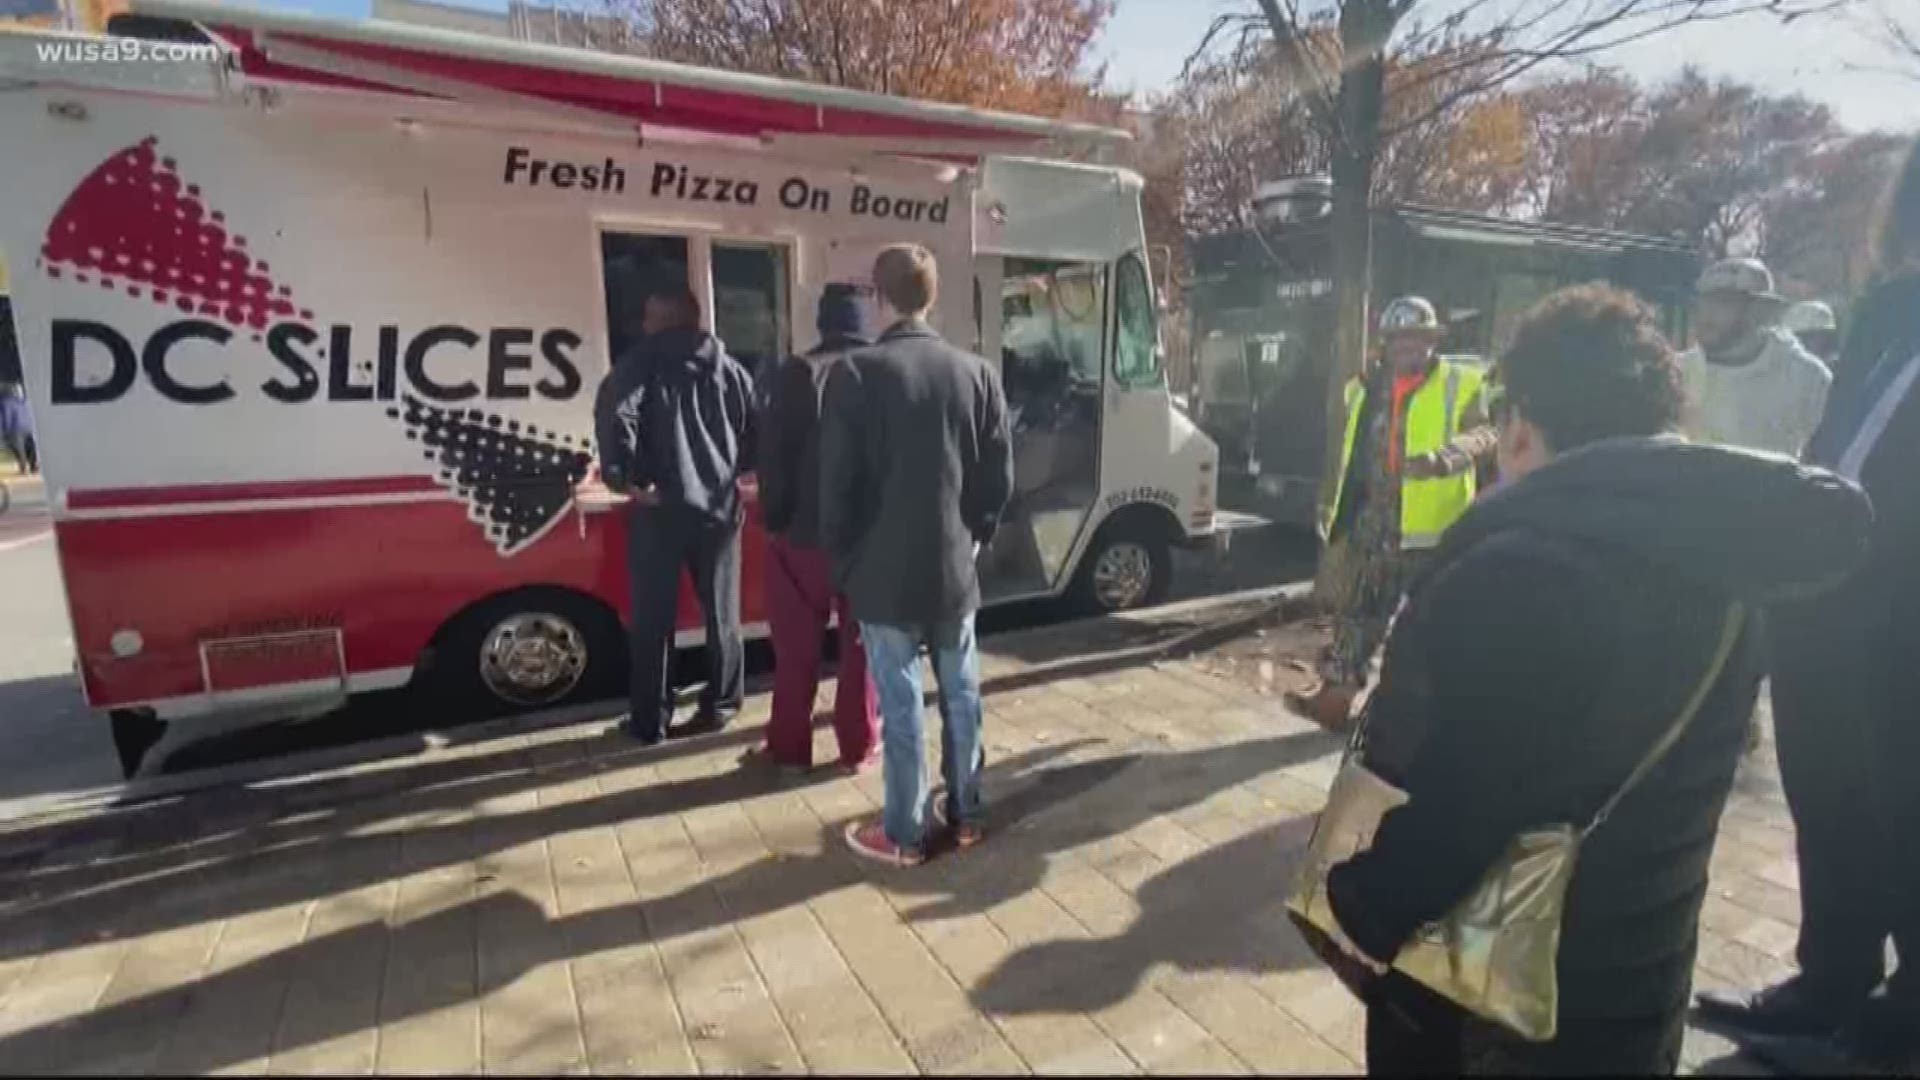 Ariane sat down with Zach Graybill of DC Slices - DC's oldest food truck - to talk about the issues they're facing and the support they need from the government